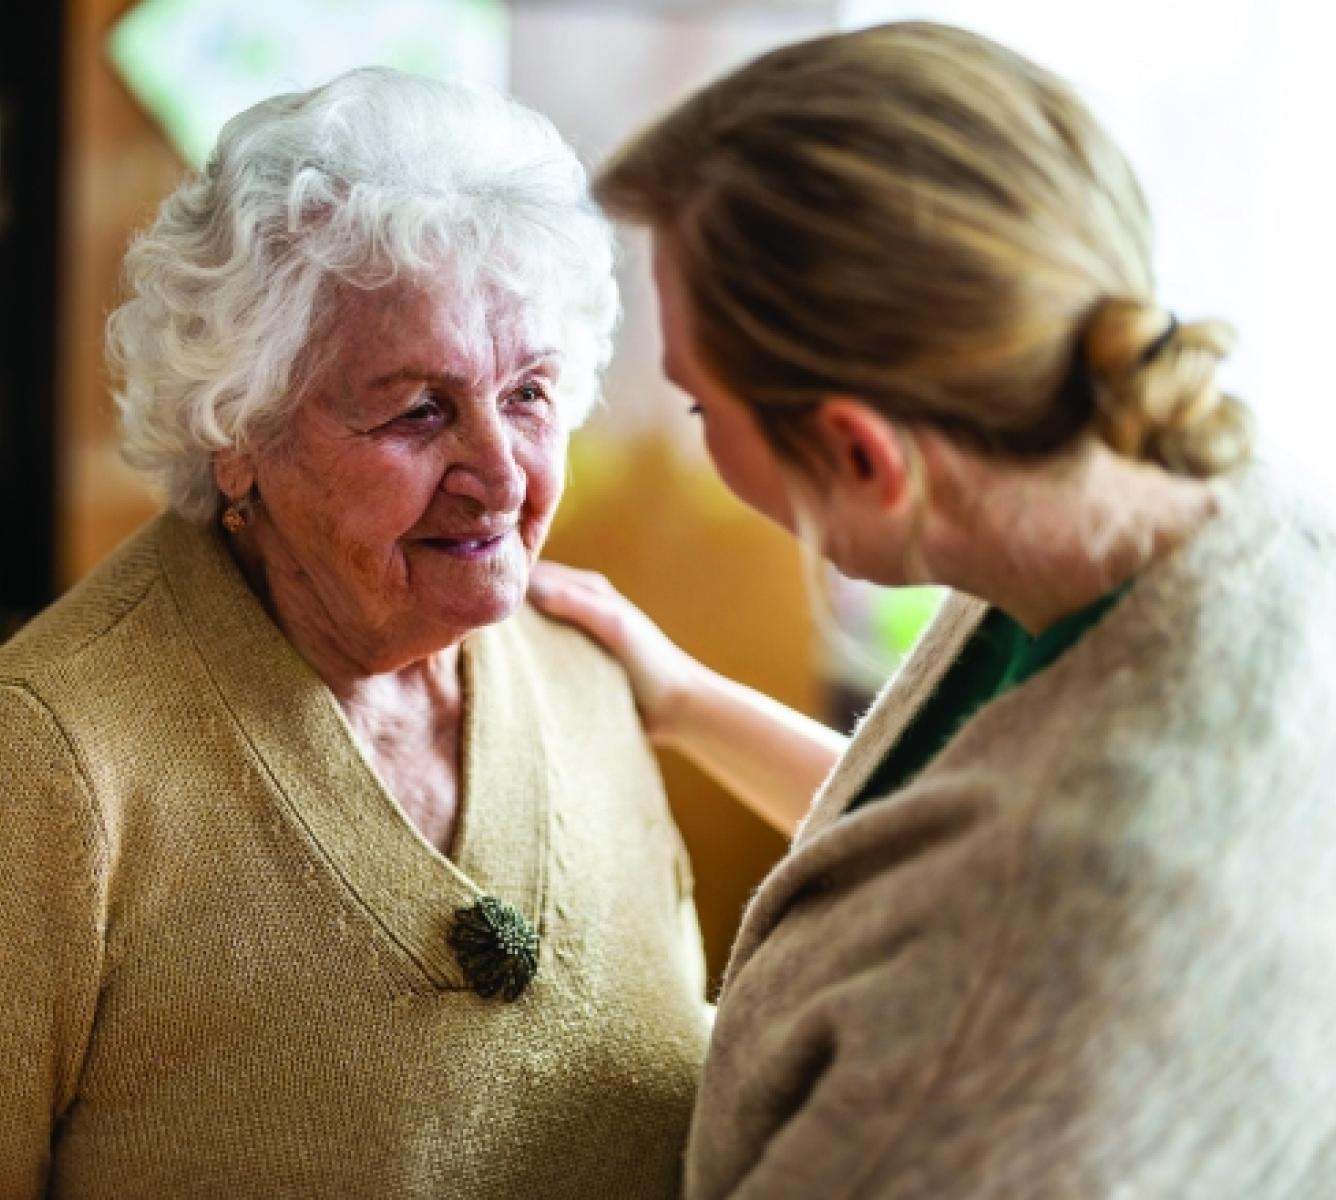 An aged care worker tending to an elderly woman.